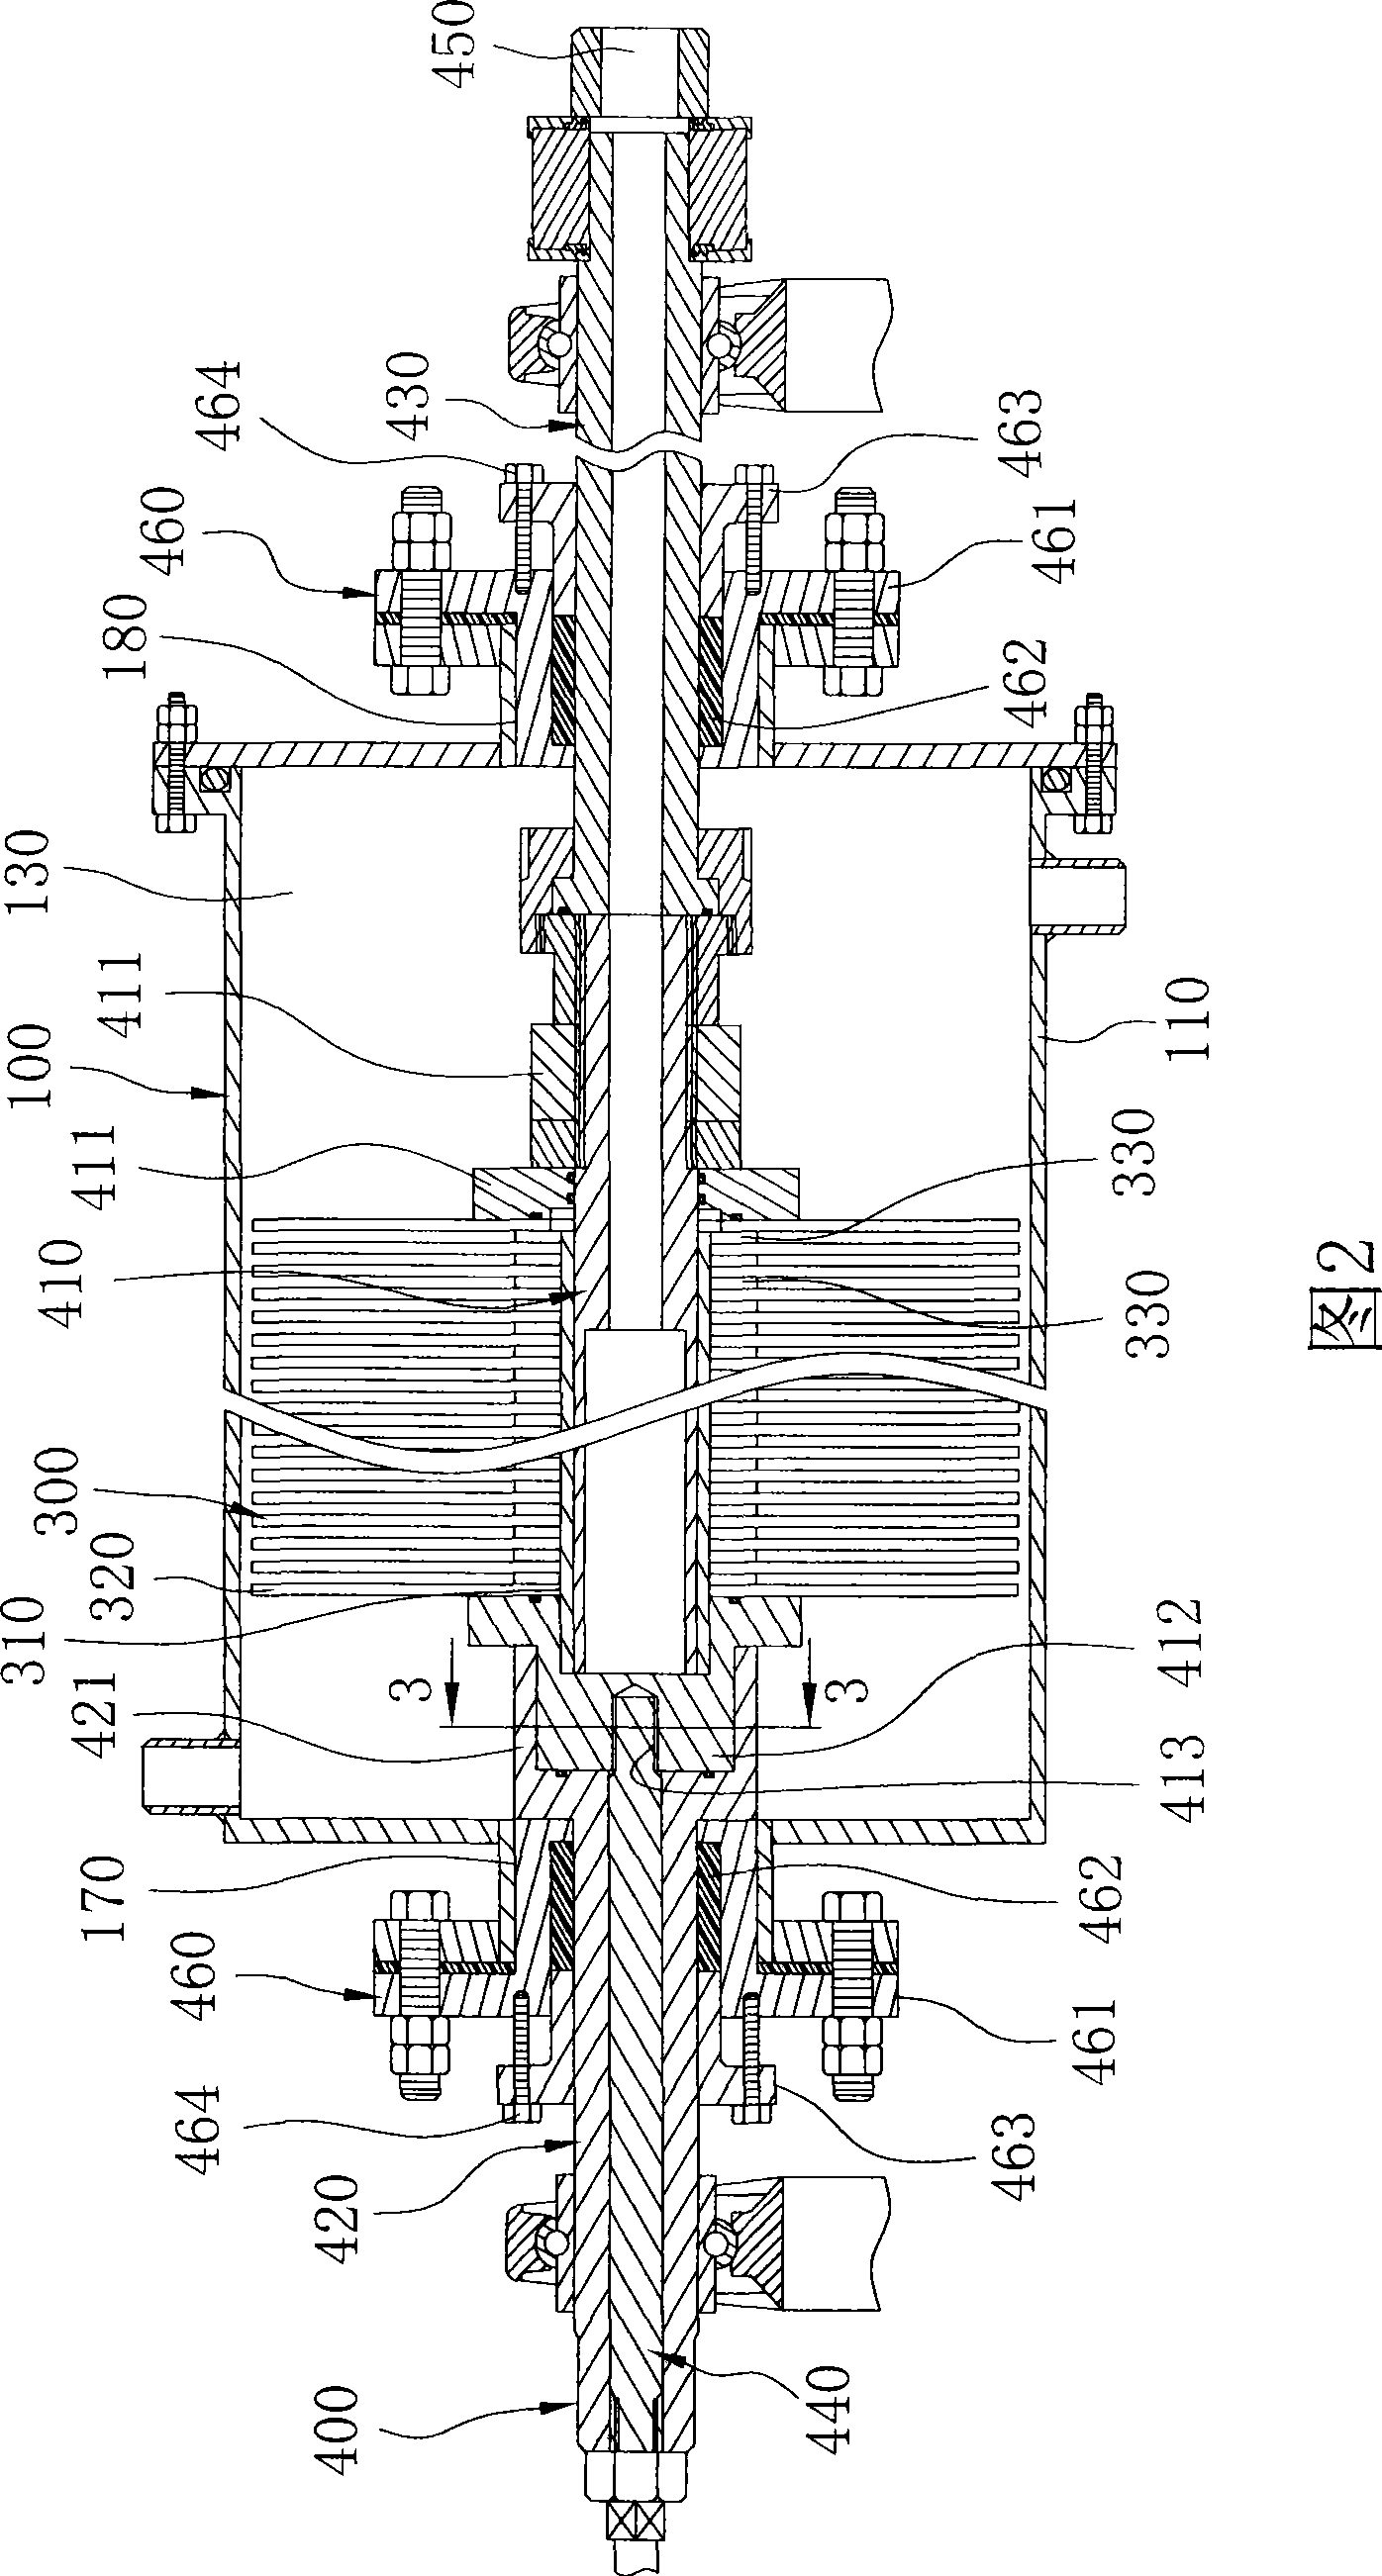 Closed whirling type filter membrane device